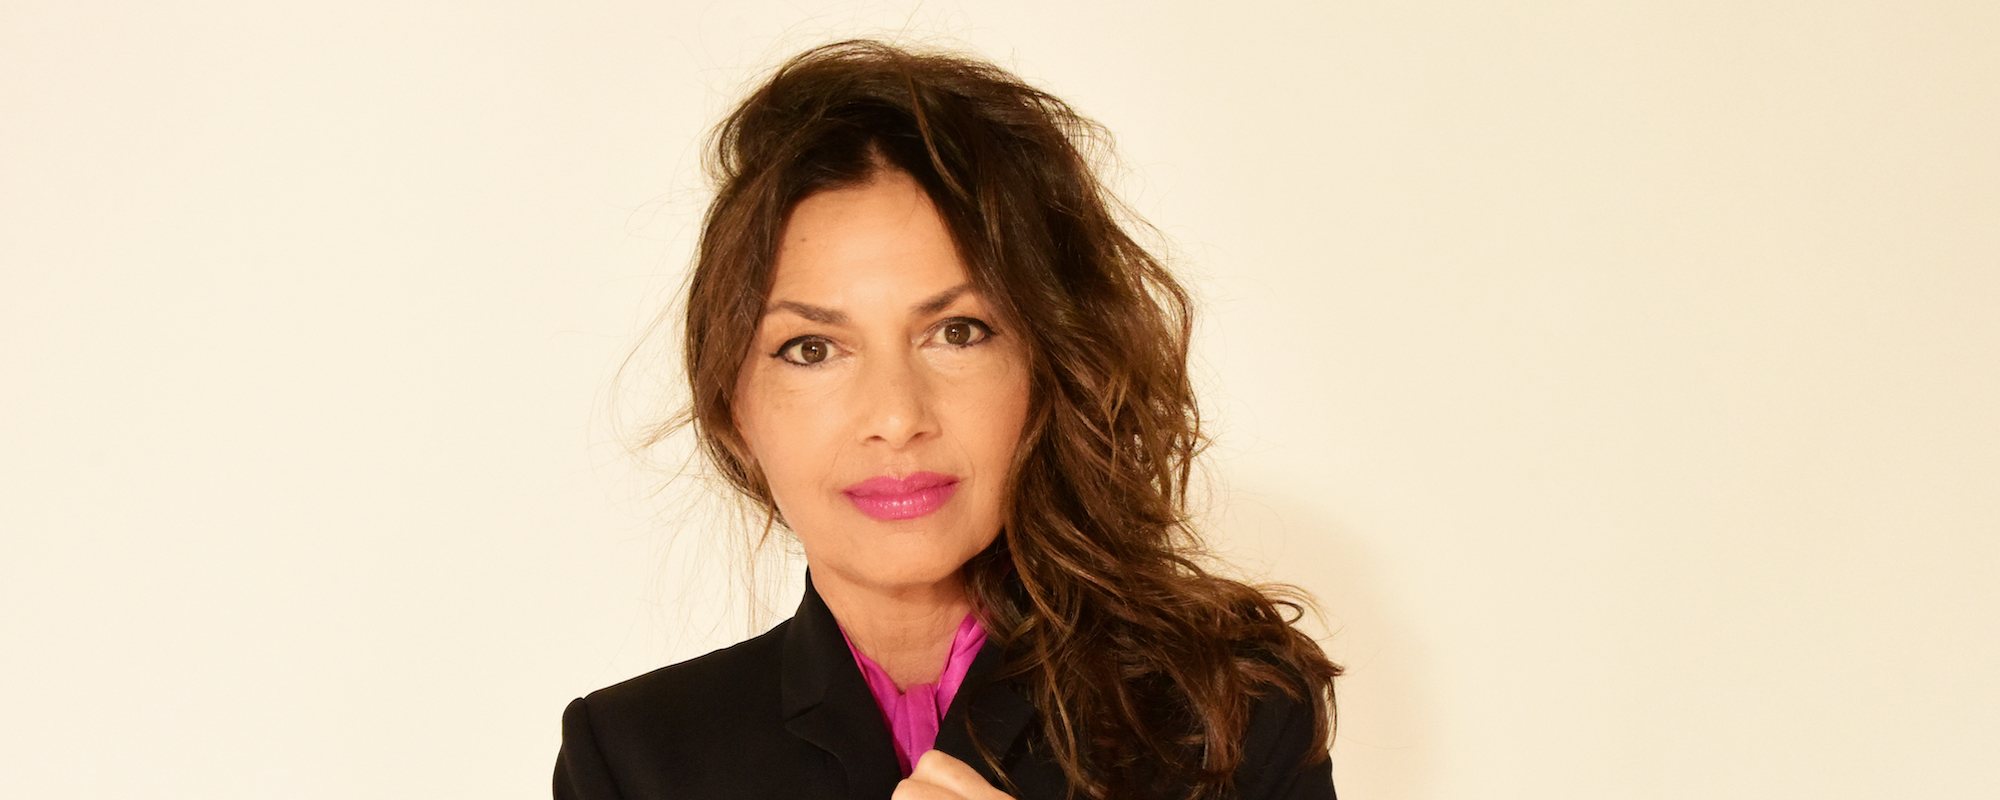 Susanna Hoffs Switches Roles on The Rolling Stones’ “Under My Thumb,” Reveals New Album